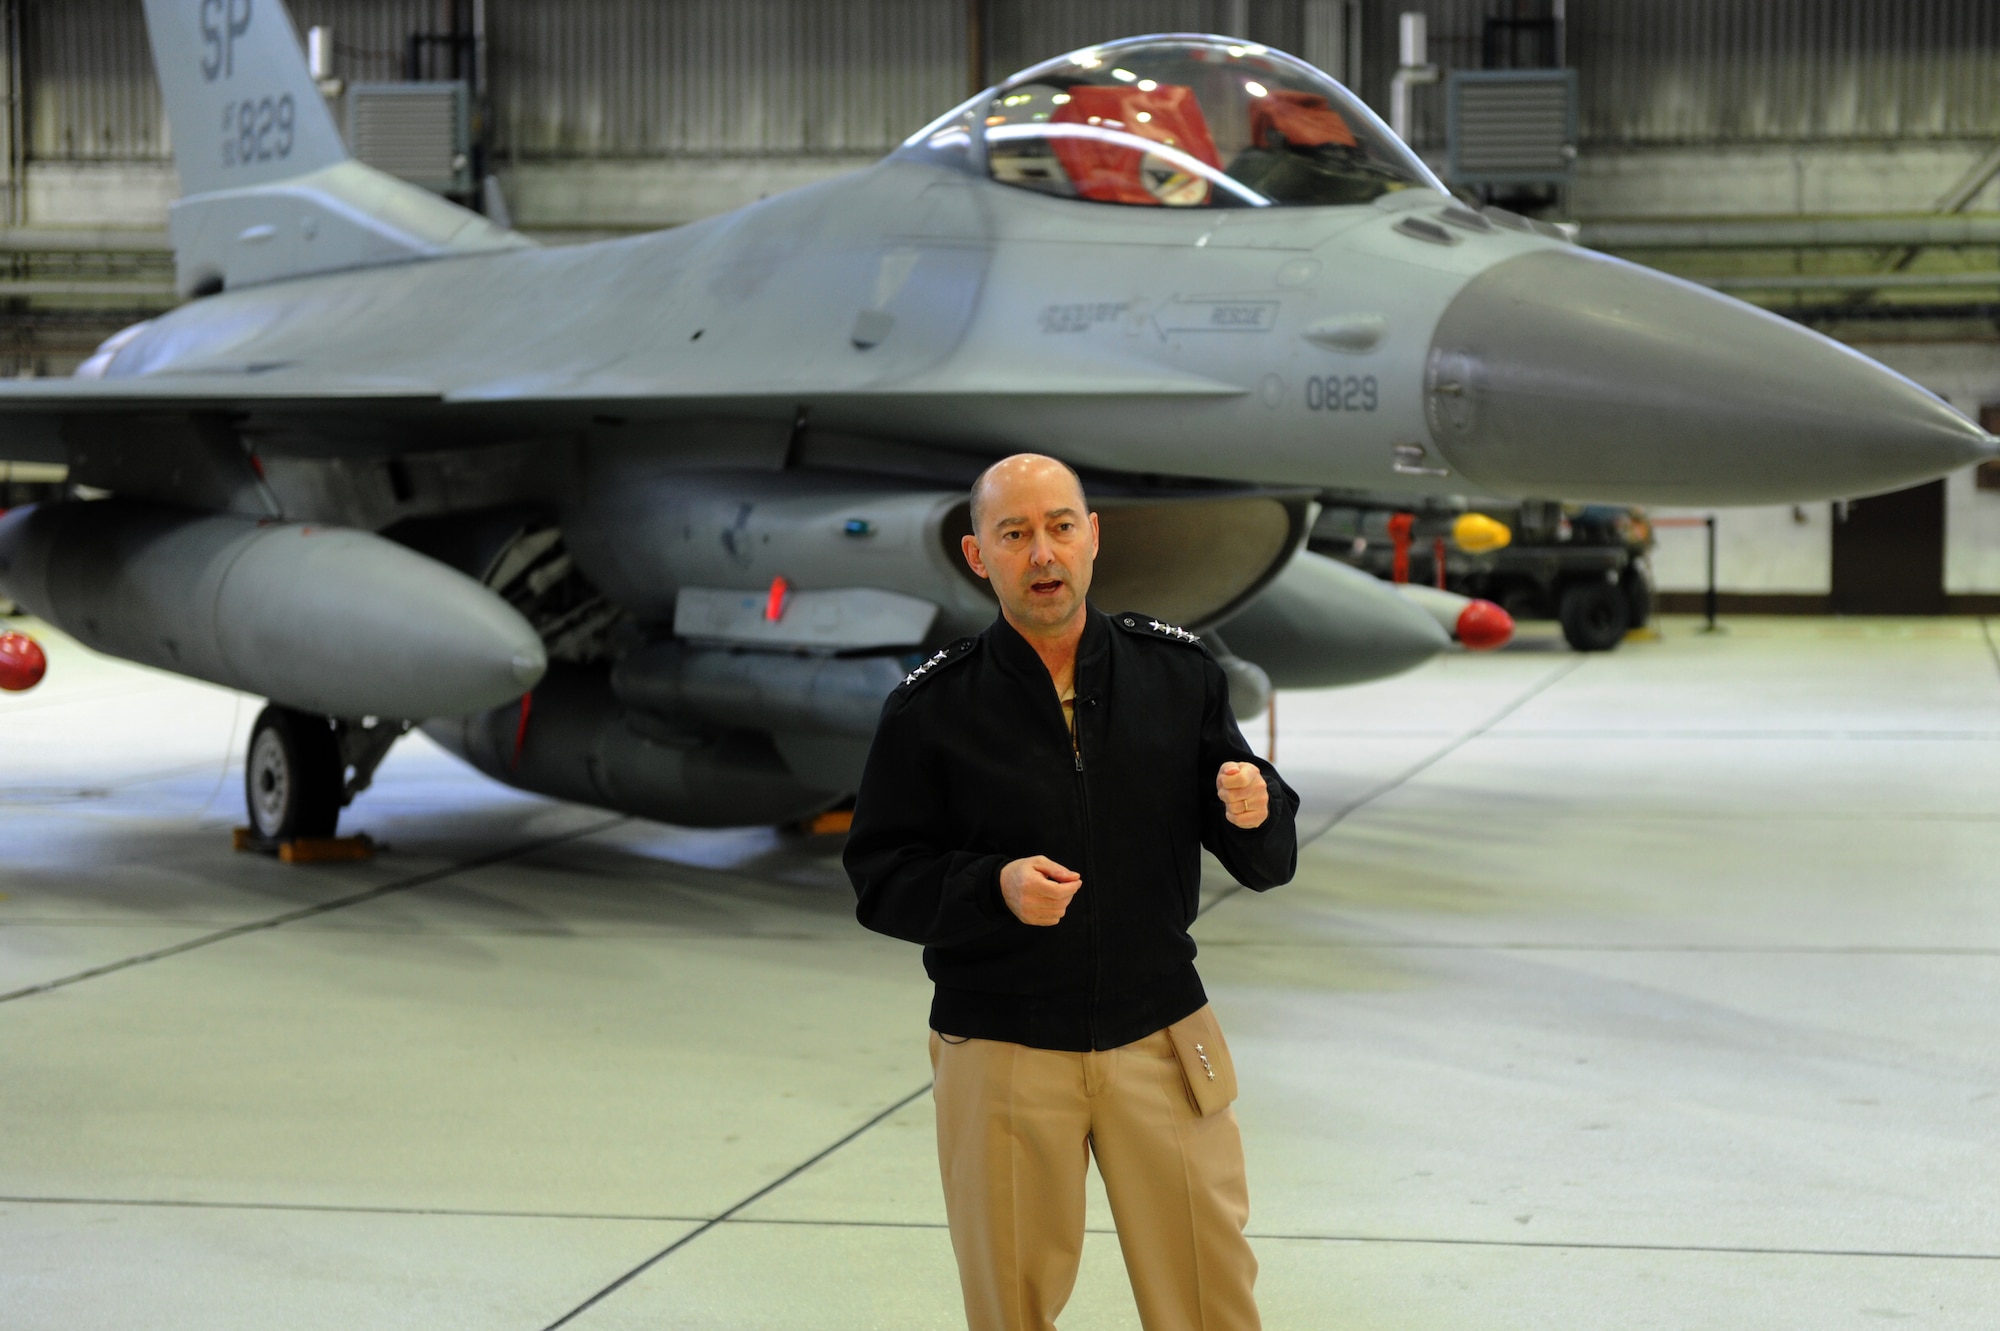 SPANGDAHLEM AIR BASE, Germany -- U.S. Navy Adm. Jim Stavridis, U.S. European Command commander and NATO Supreme Allied Commander Europe, filmed an American Forces Network commercial in Hangar 1 here Dec. 14. During his familiarization tour, Stavridis saw the unique capabilities the 52nd Fighter Wing provides to the European theater of operations and learned about some of the wing’s accomplishments this year. (U.S. Air Force photo/Airman 1st Class Matthew B. Fredericks)